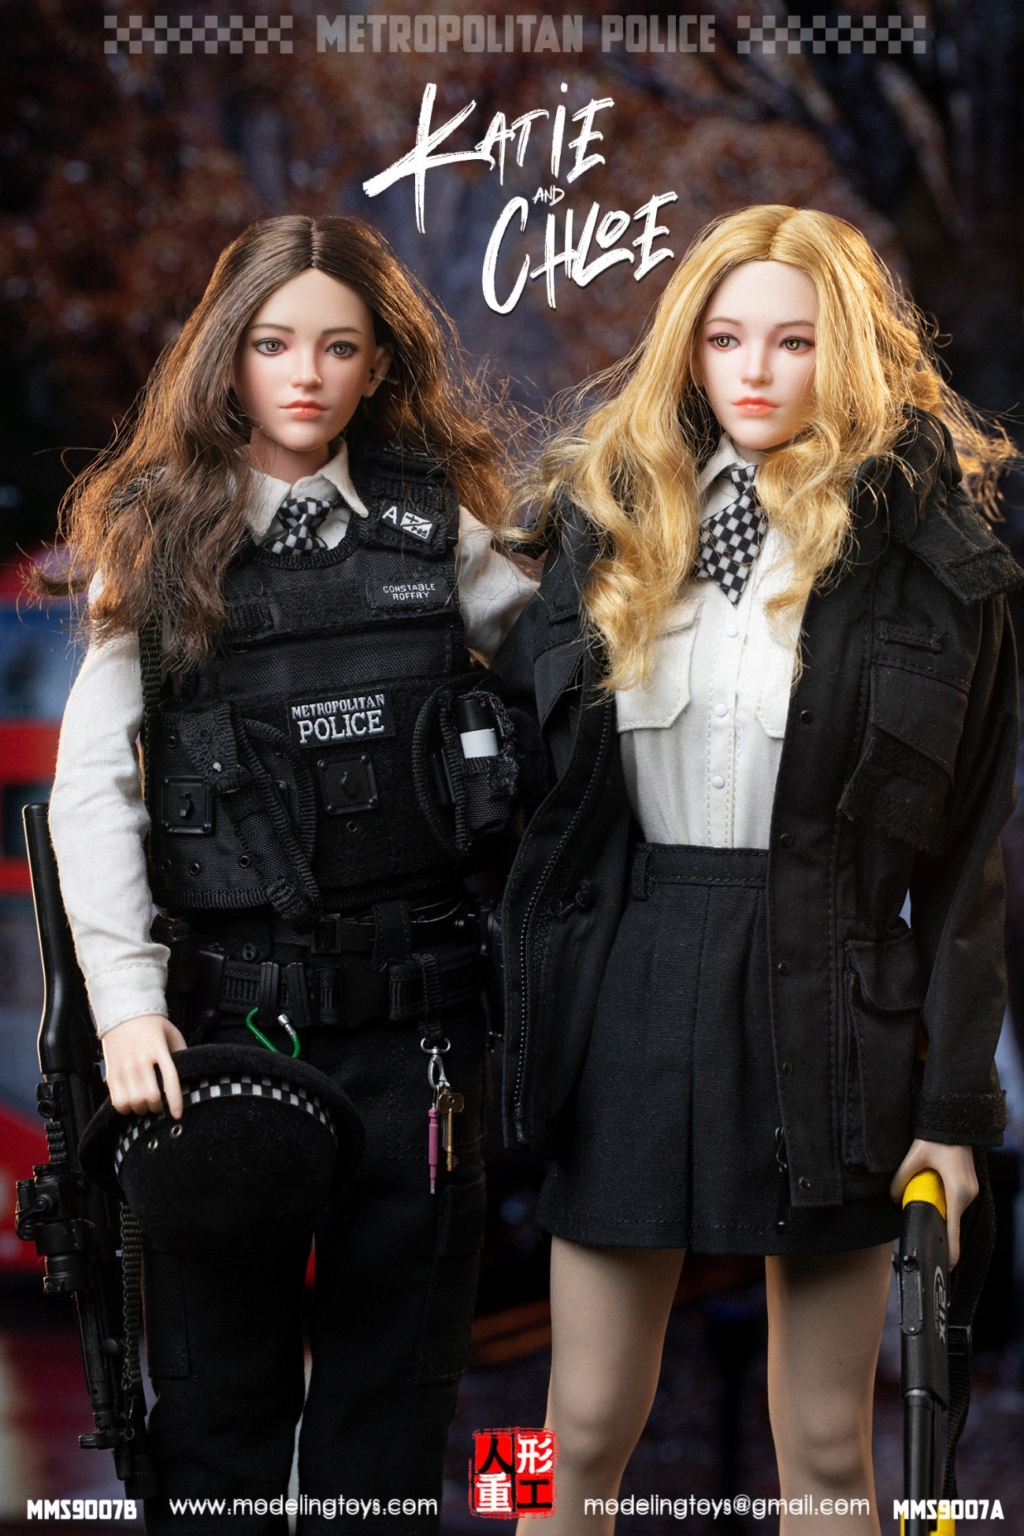 Katie - NEW PRODUCT: MODELING TOYS: 1/6 London Police Agency-Armed Police Chloe/Katy C4a8dc10